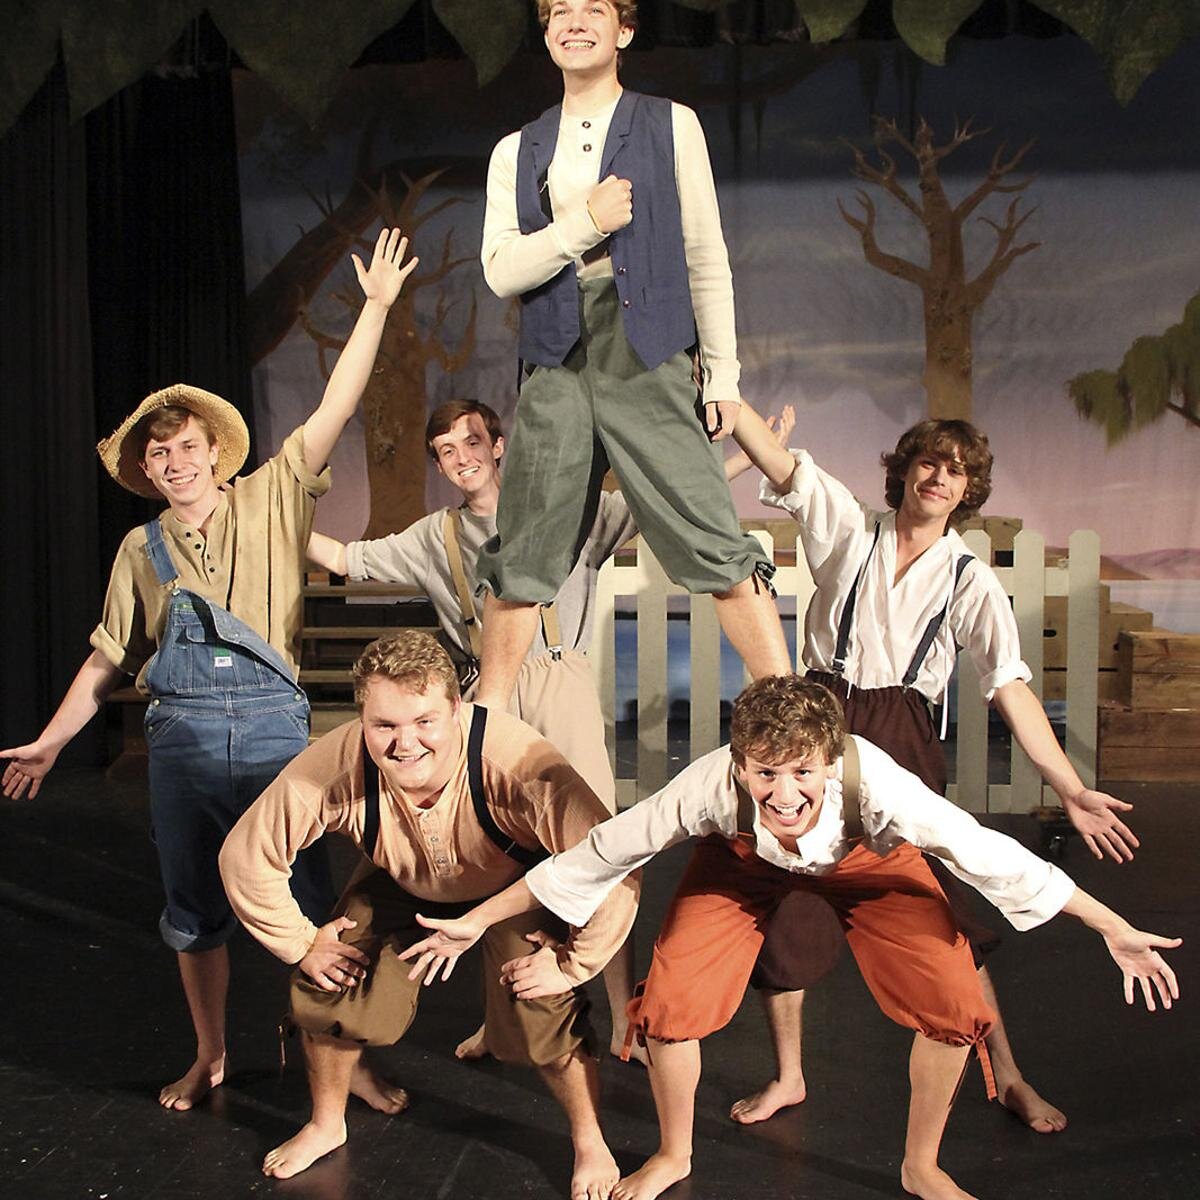  Tom Sawyer (played by Bryce Mixon) in Lowndes High School’s production of Tom Sawyer. Photo: Dean Poling 